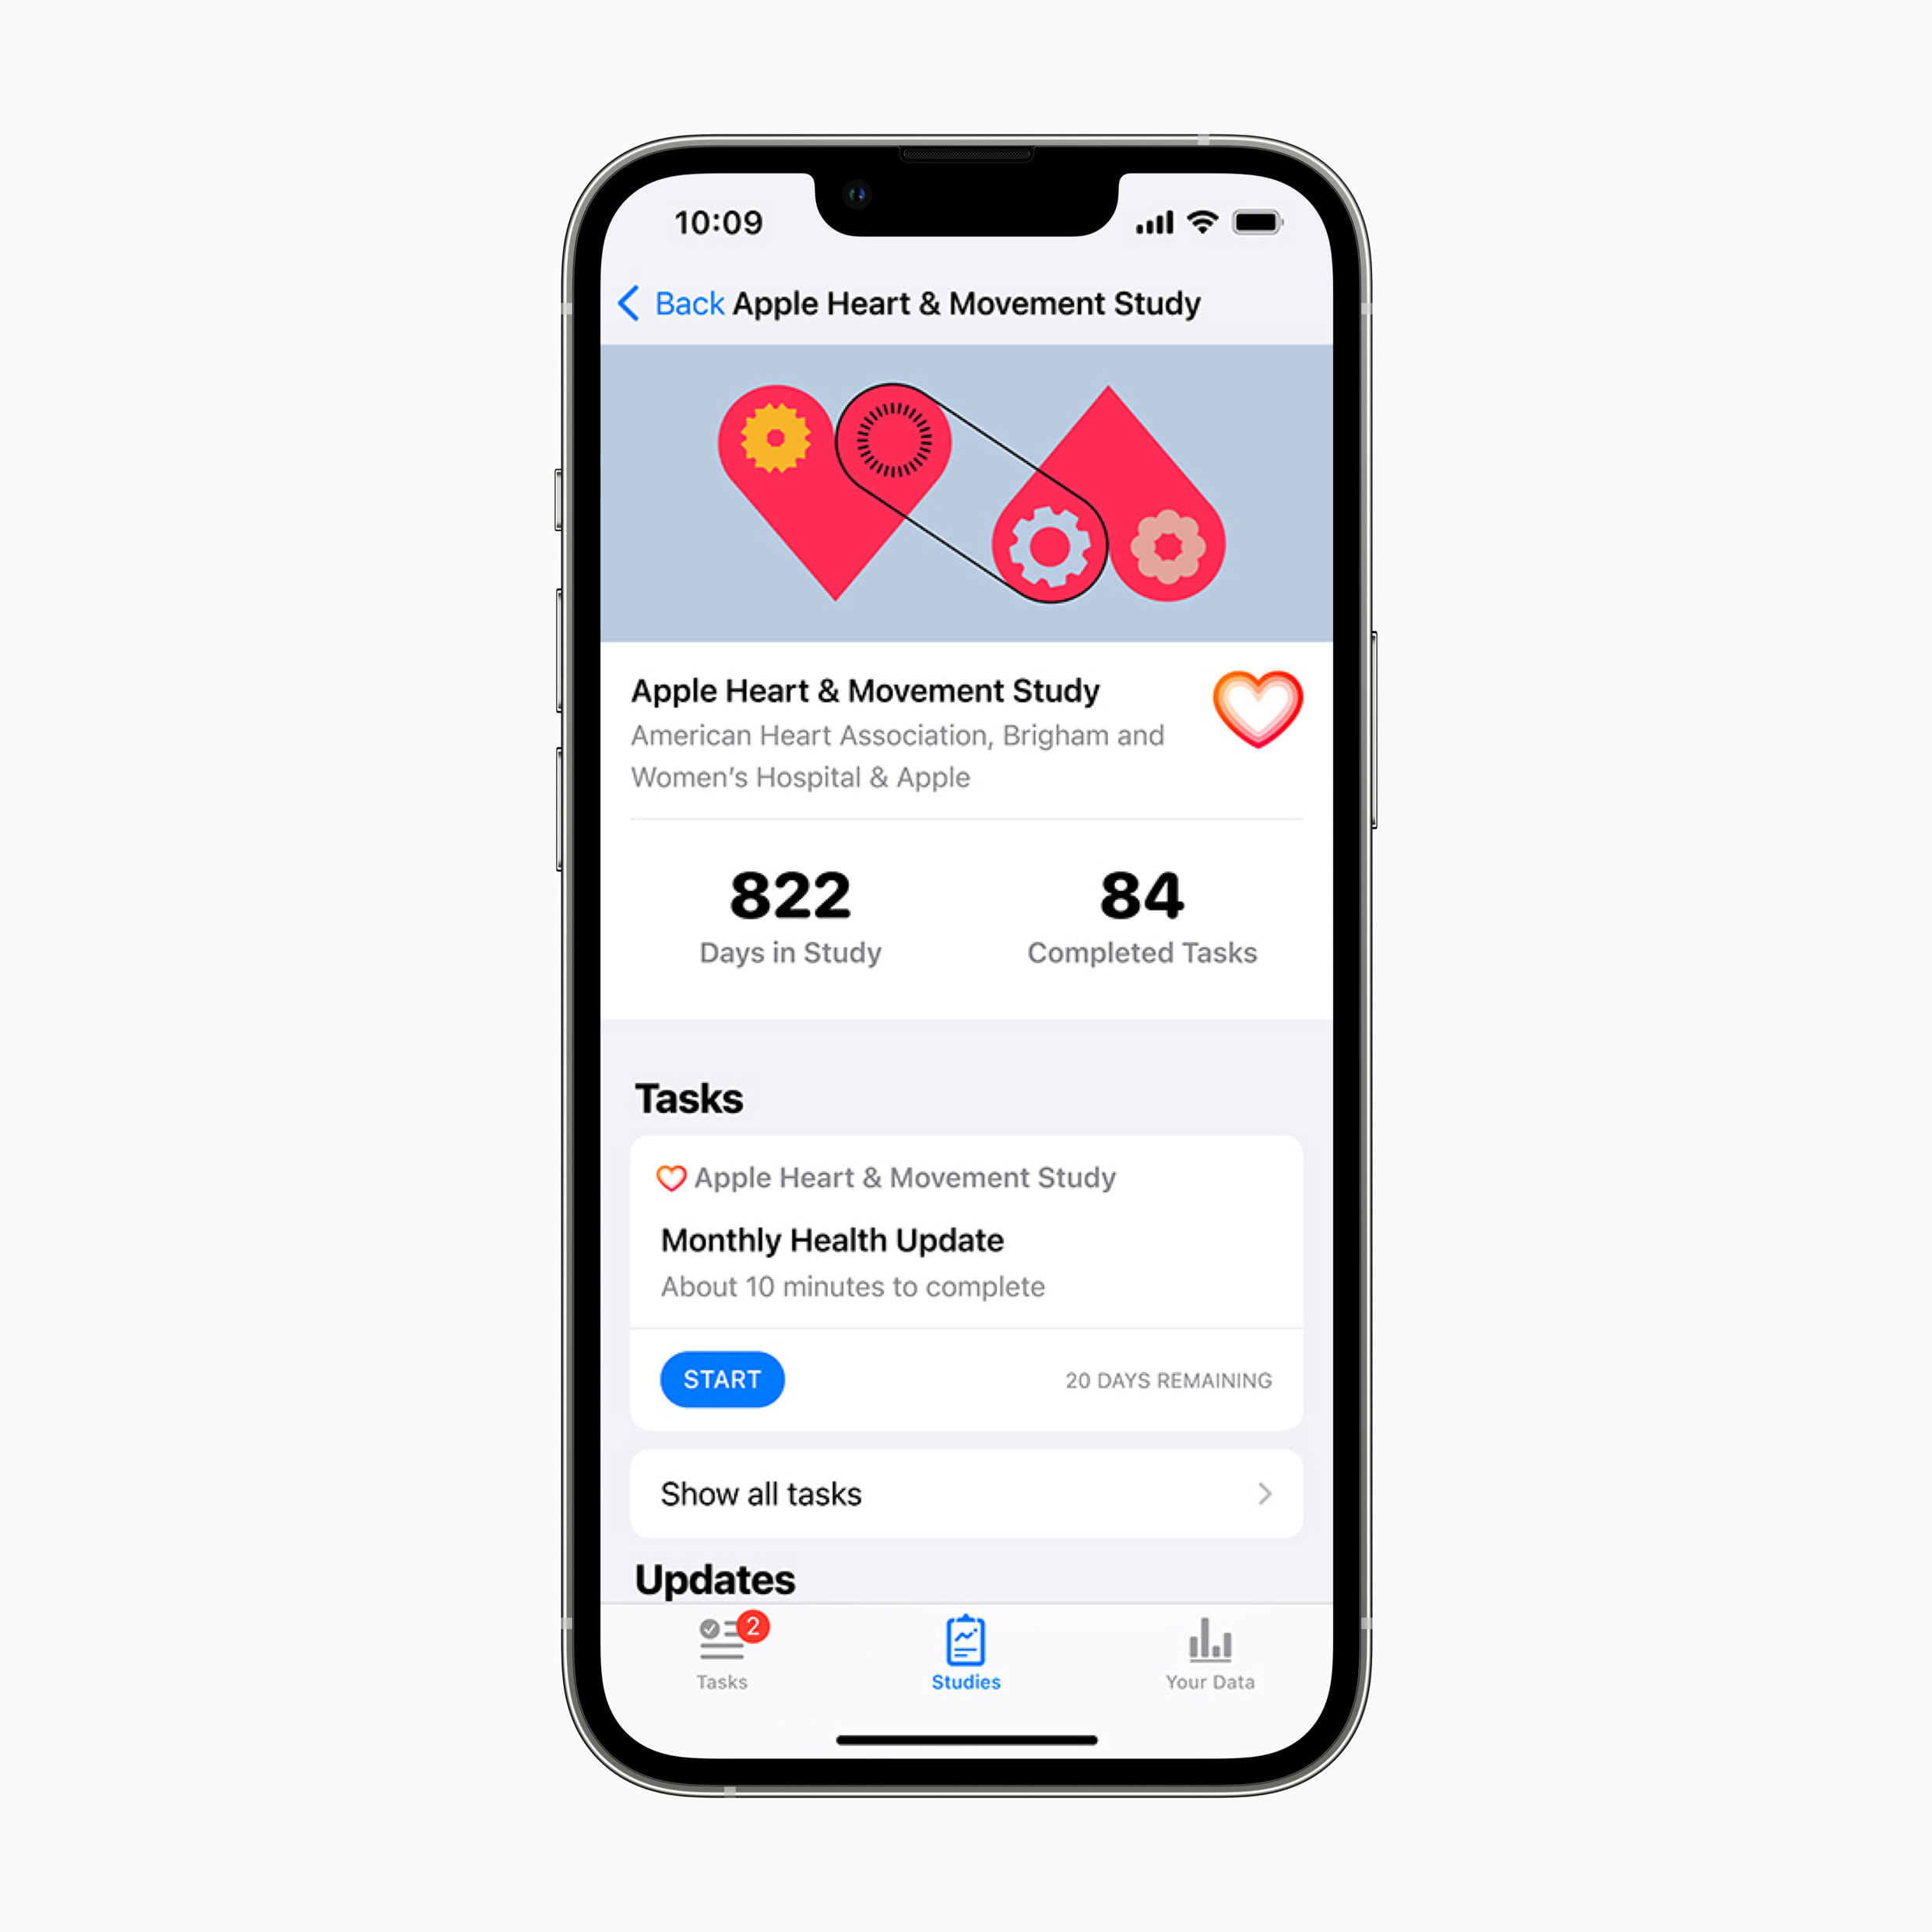 How Apple Is Empowering People With Their Health Information - Apple (Au)